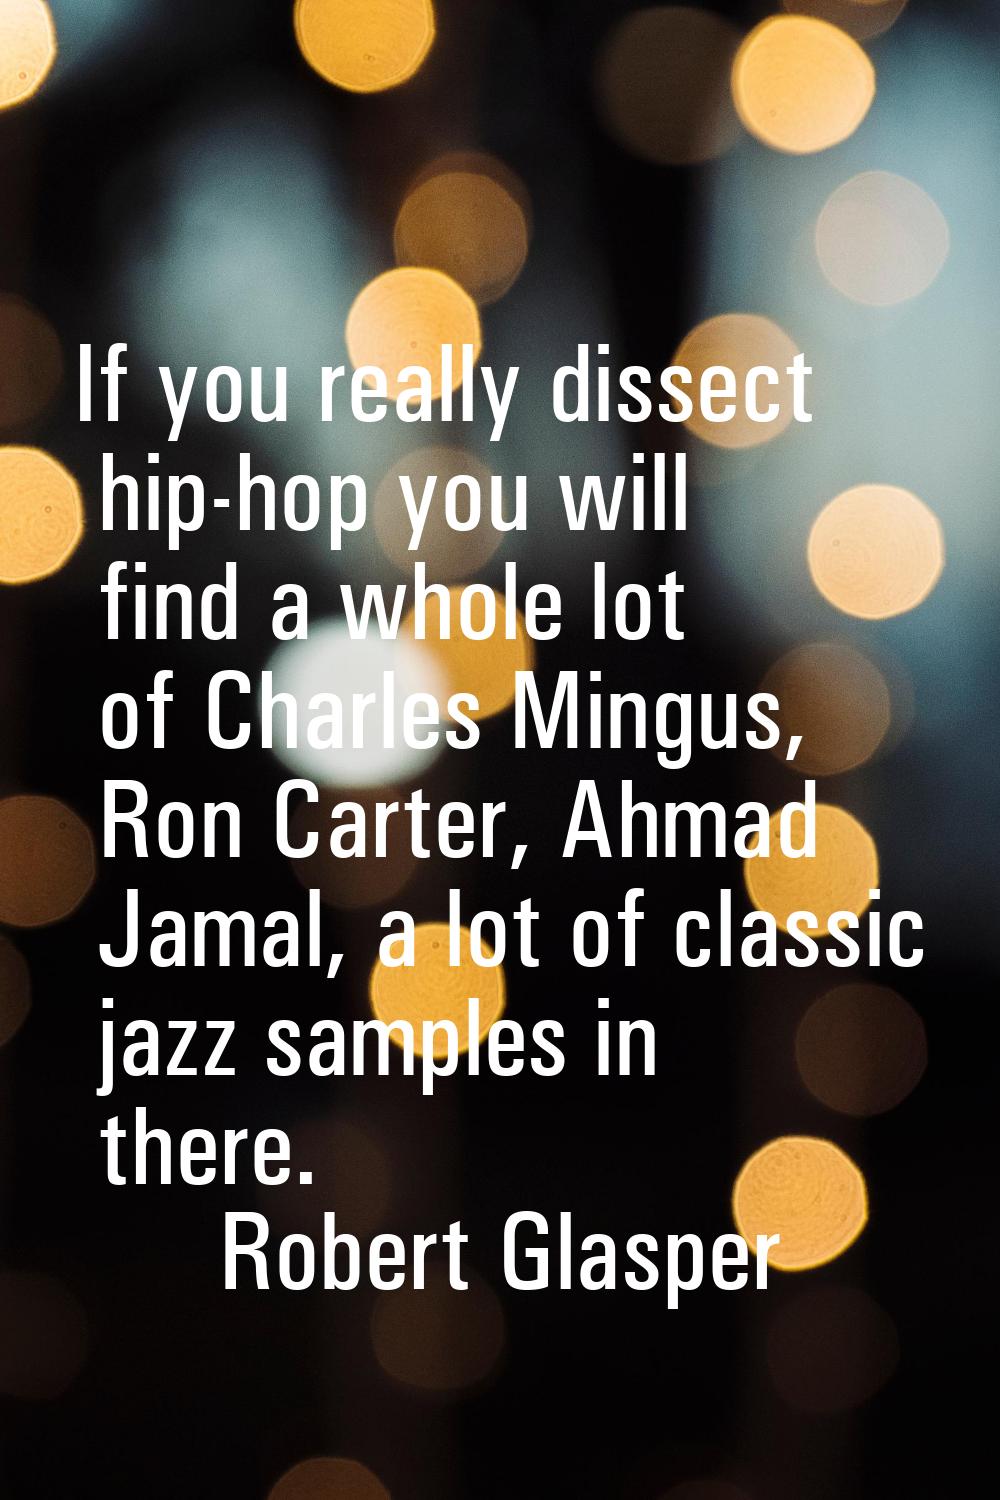 If you really dissect hip-hop you will find a whole lot of Charles Mingus, Ron Carter, Ahmad Jamal,